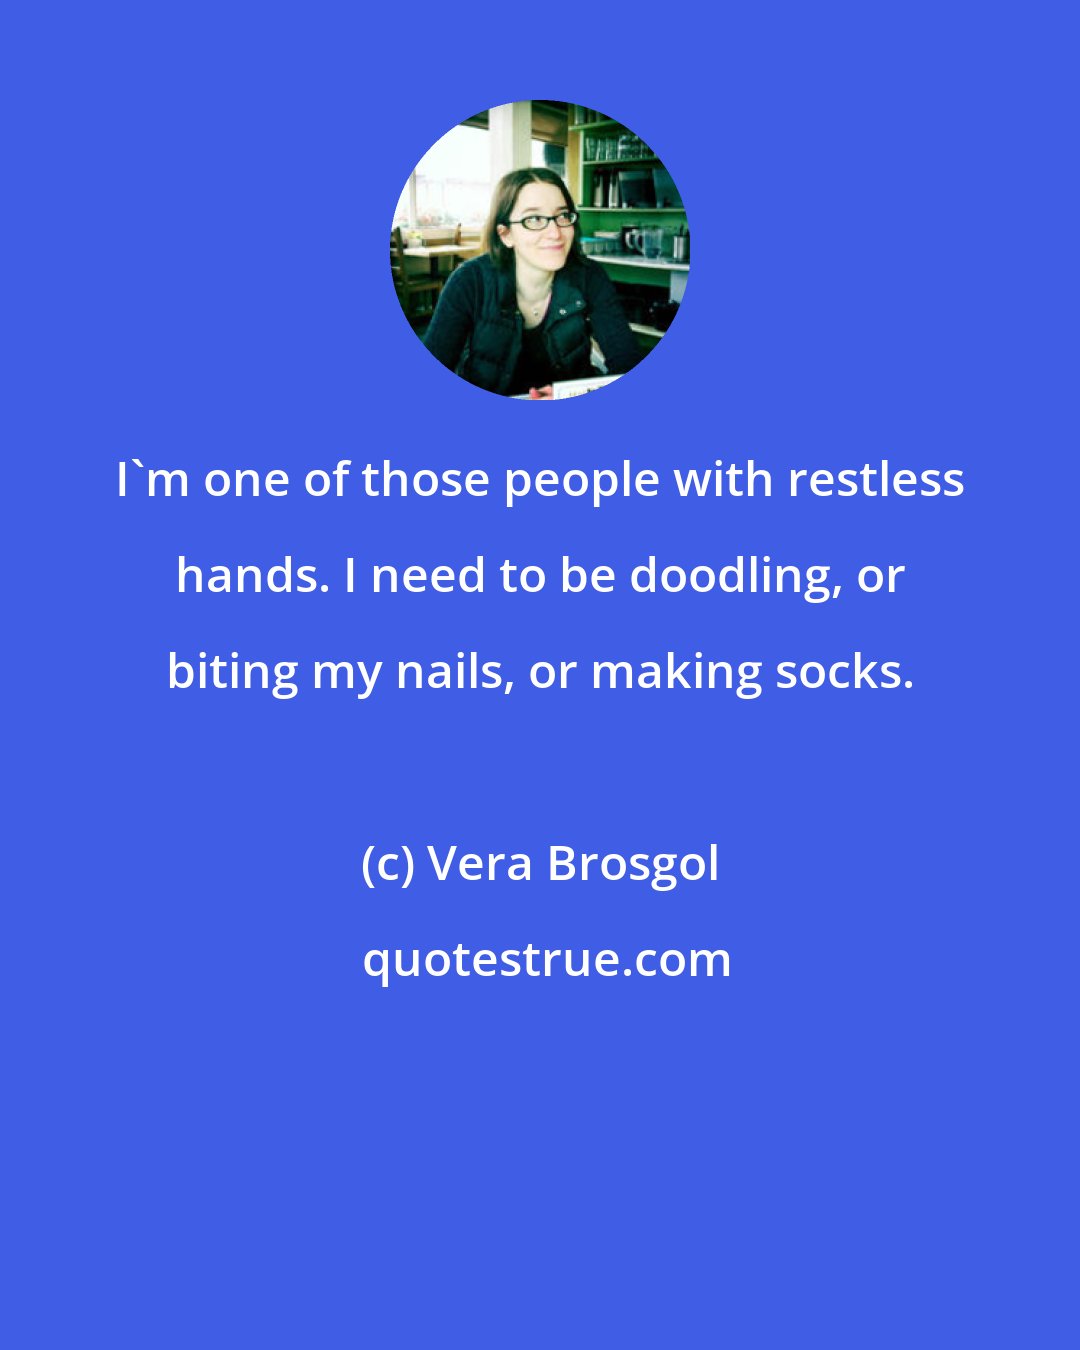 Vera Brosgol: I'm one of those people with restless hands. I need to be doodling, or biting my nails, or making socks.